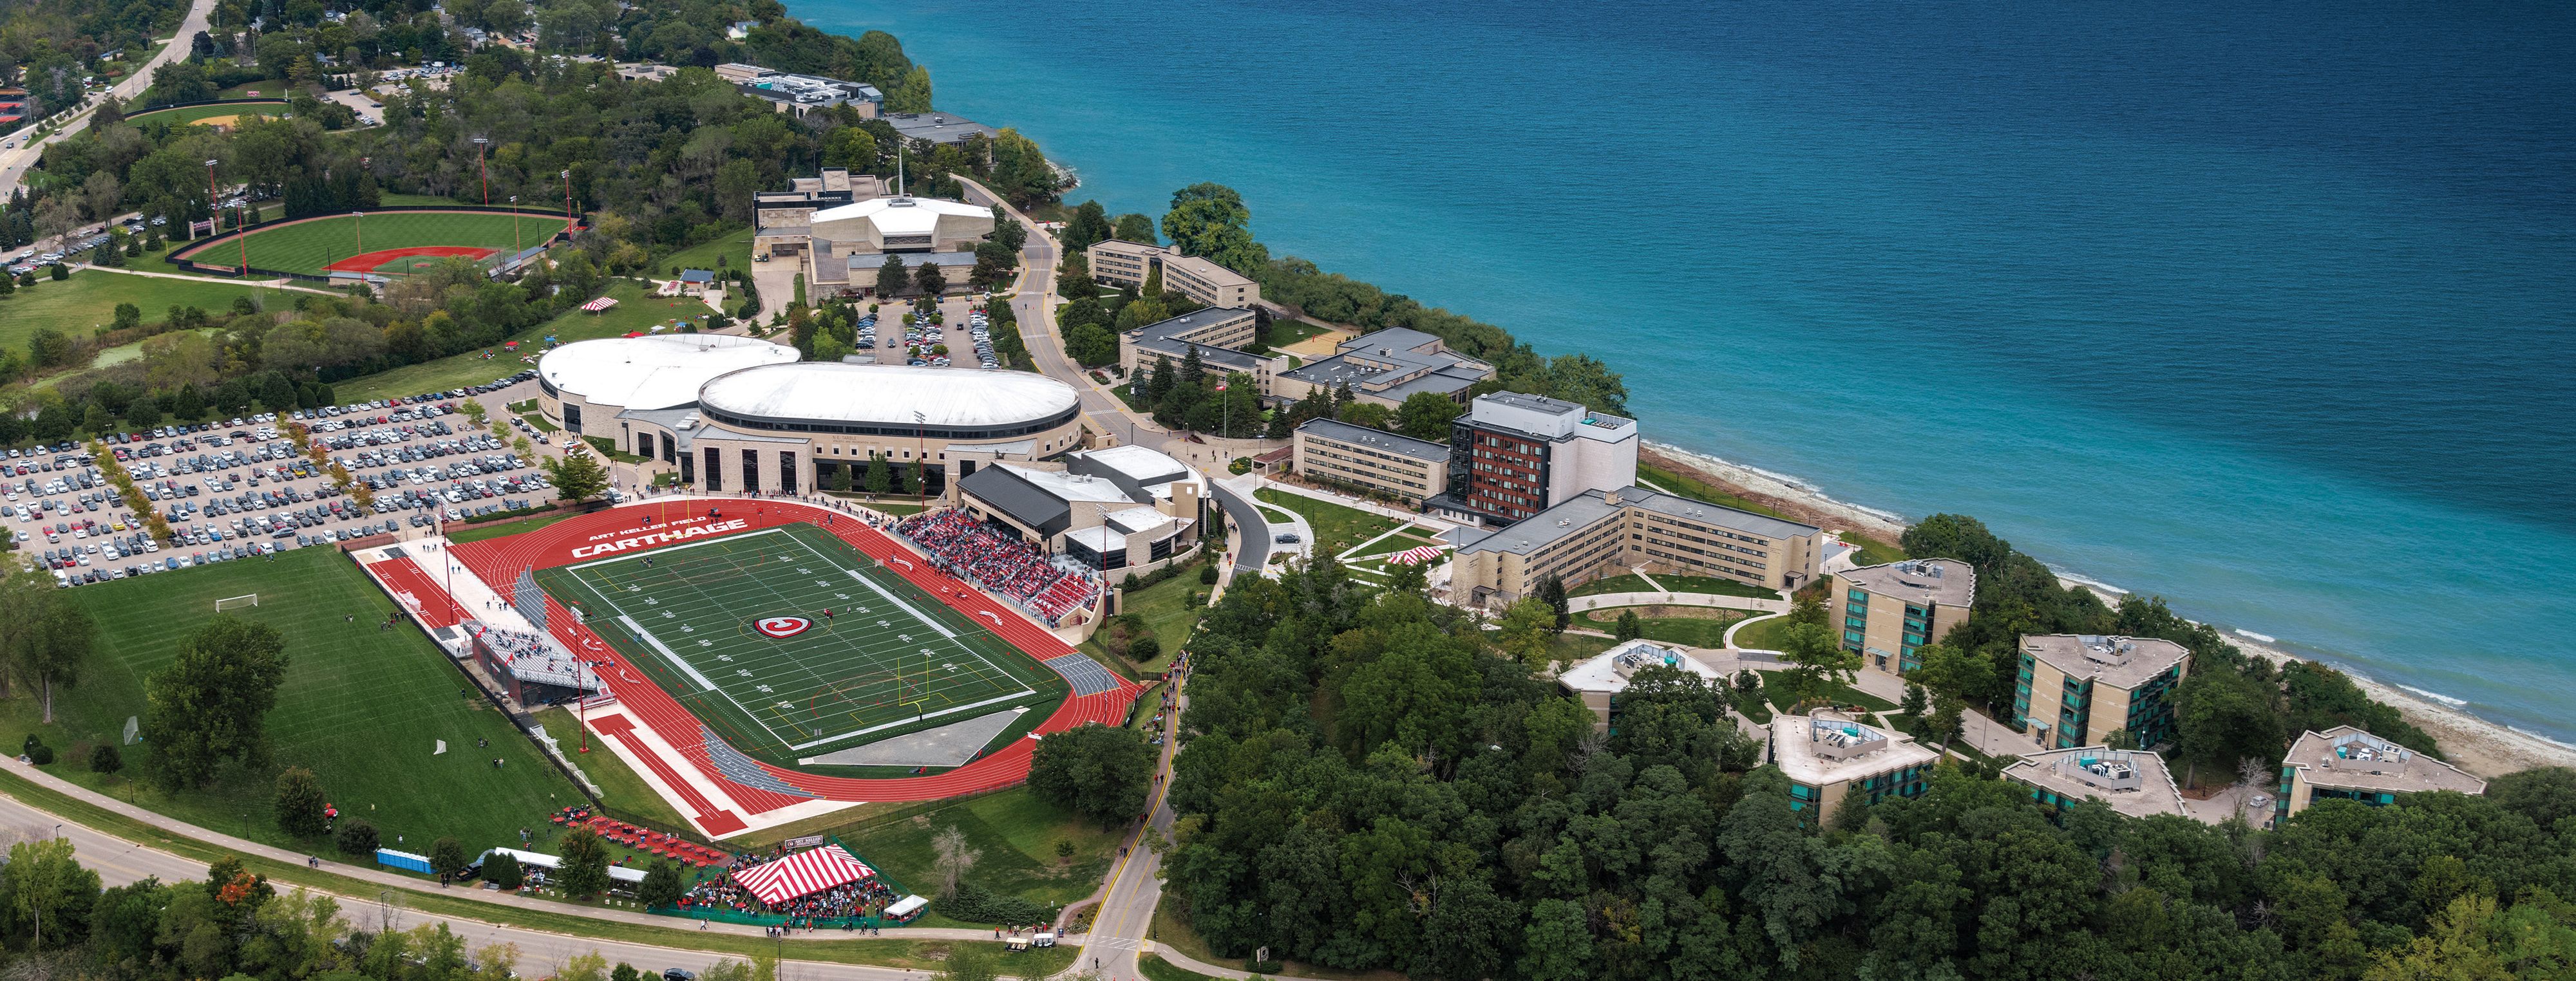 Carthage College Admission Requirements | CollegeVine